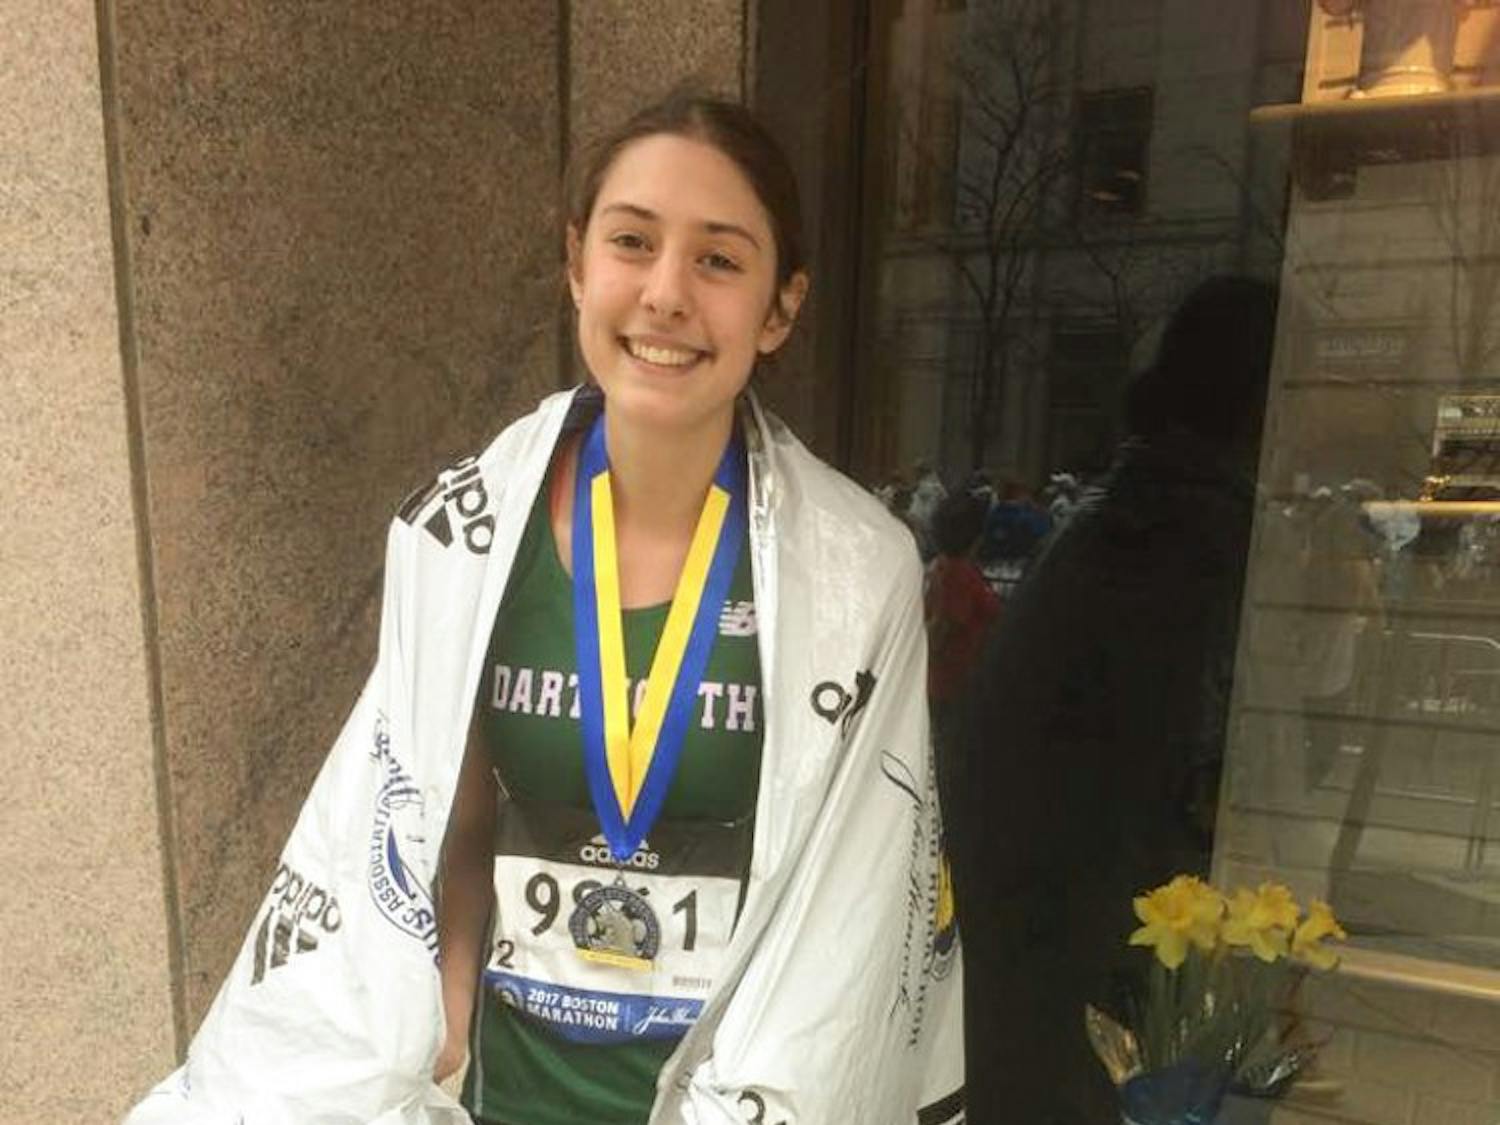 Isabella Caruso ’17 finished 40th in the women’s category and 37th in the 18 to 39 age division.